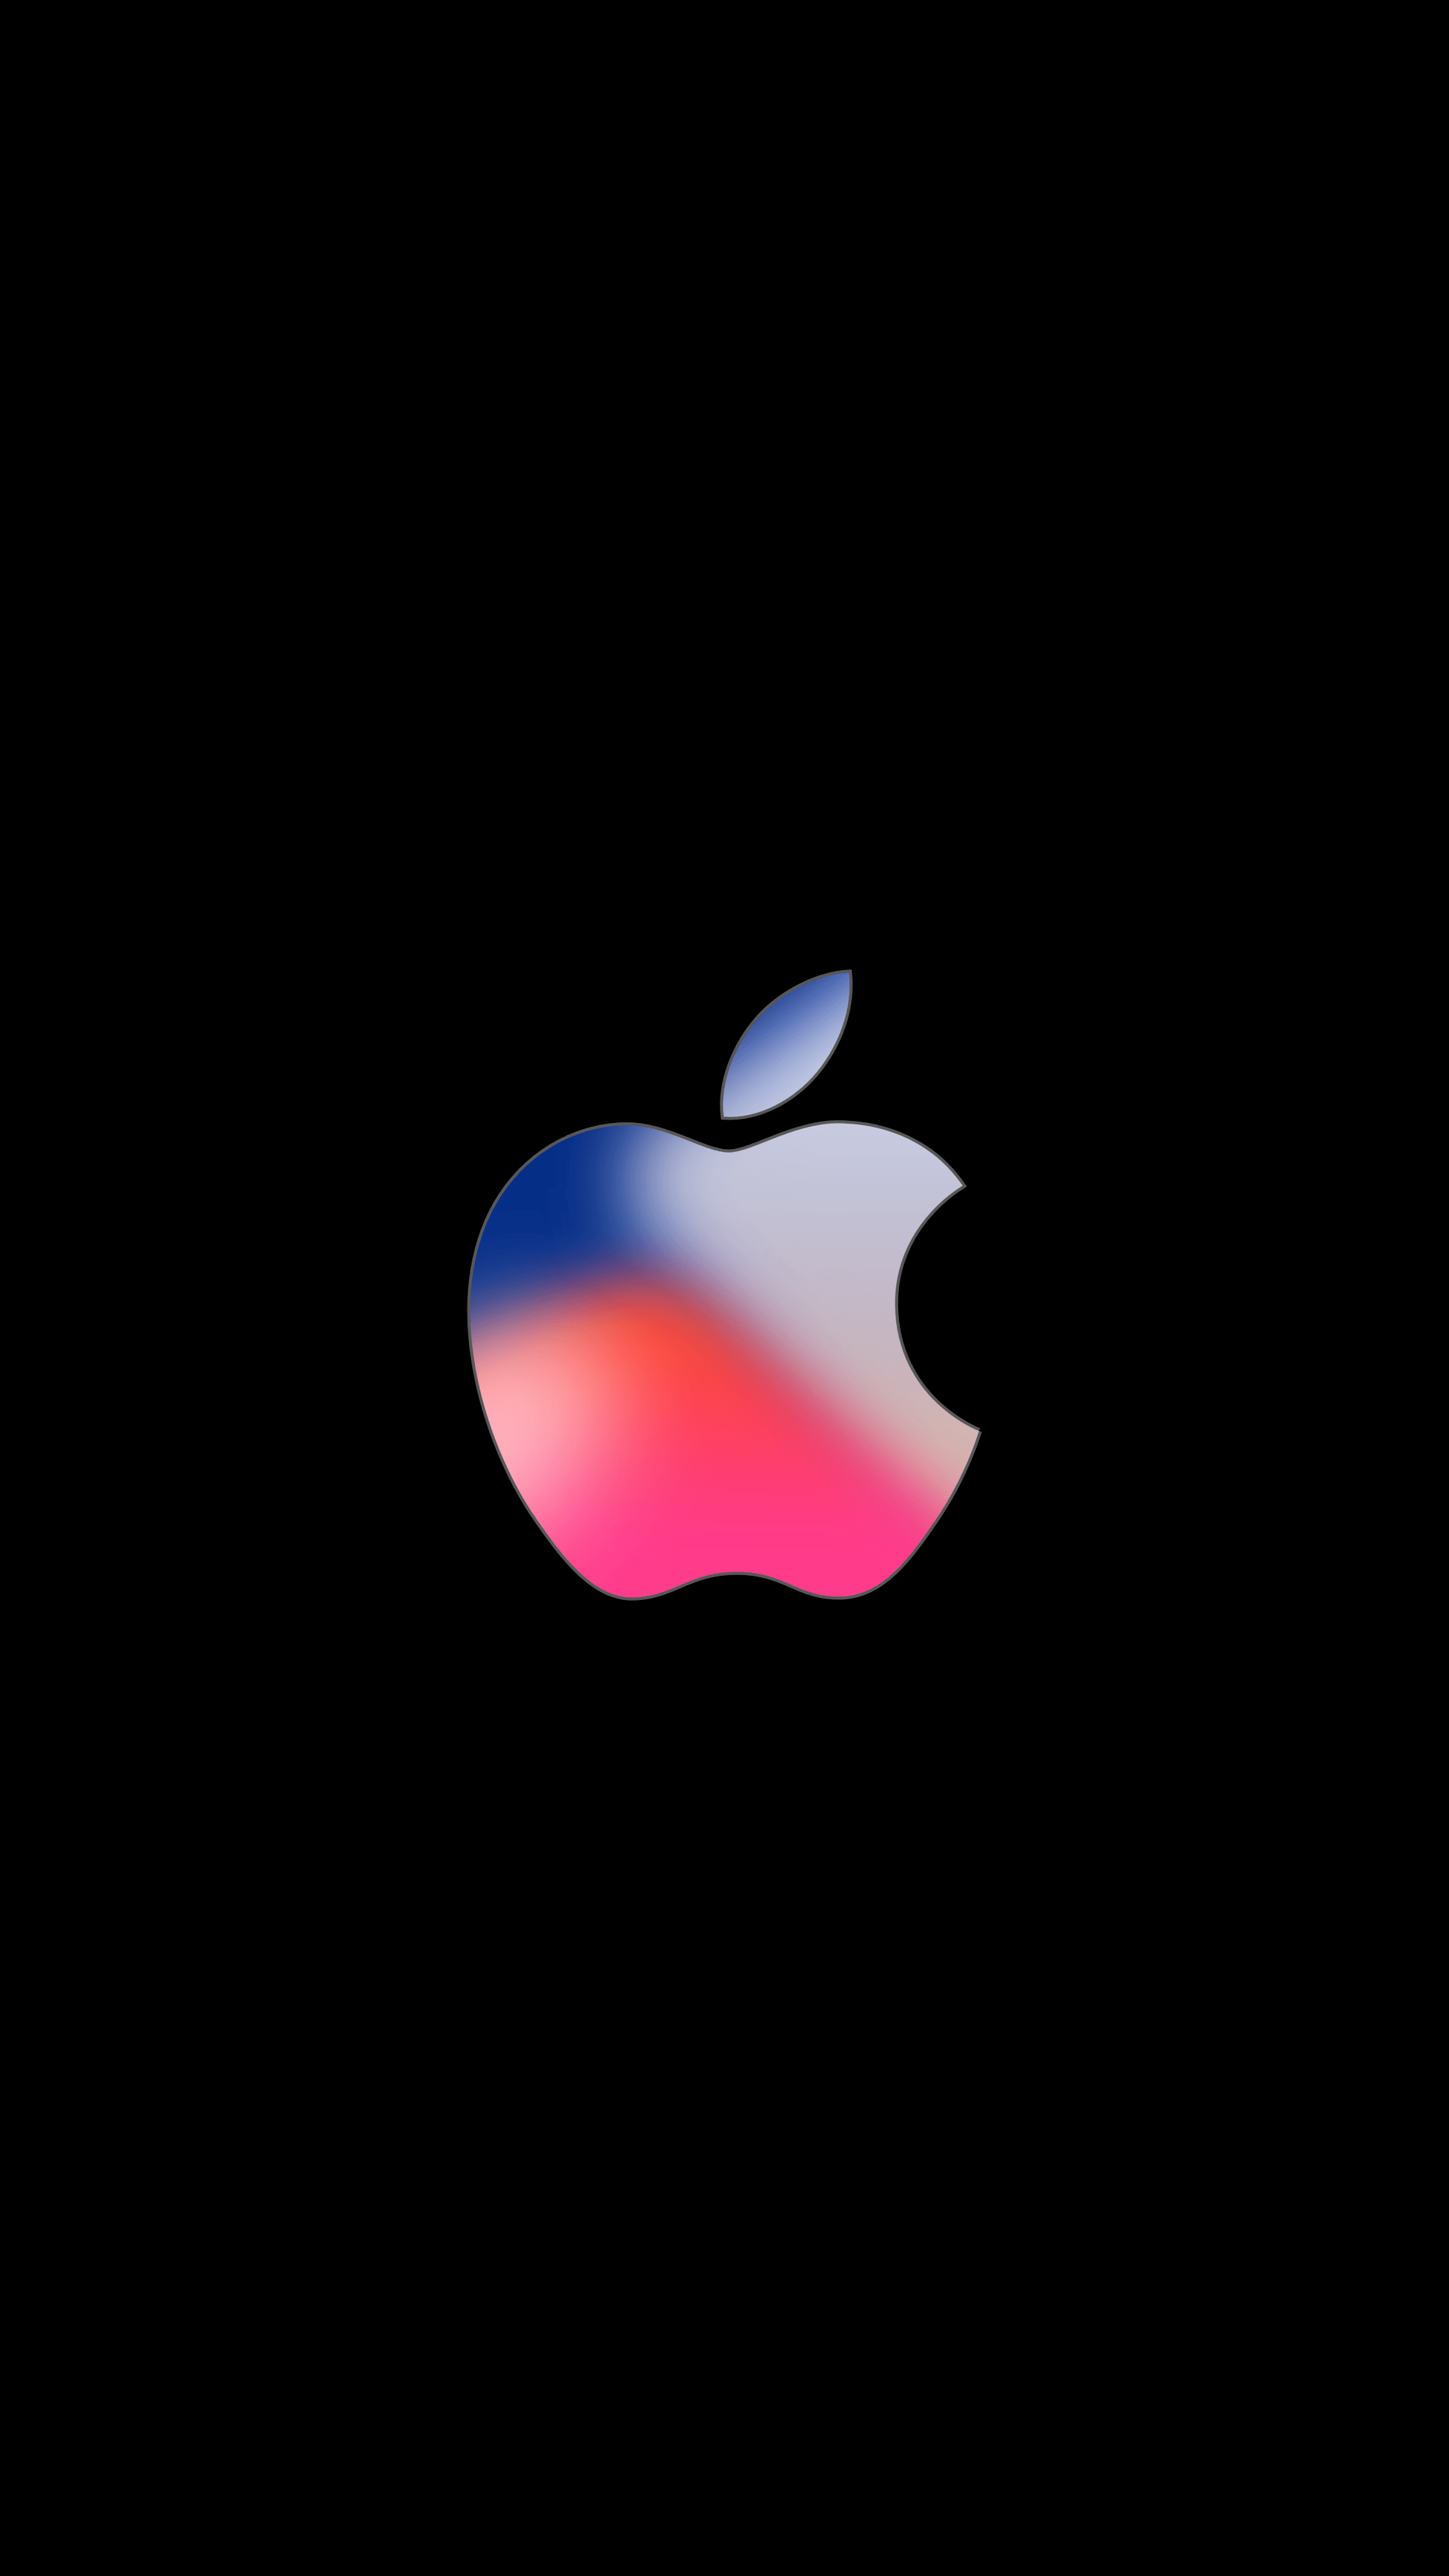 On Black Background iPhone Logo - Download September 12 iPhone 8 Event Wallpapers For iPhone, iPad and ...